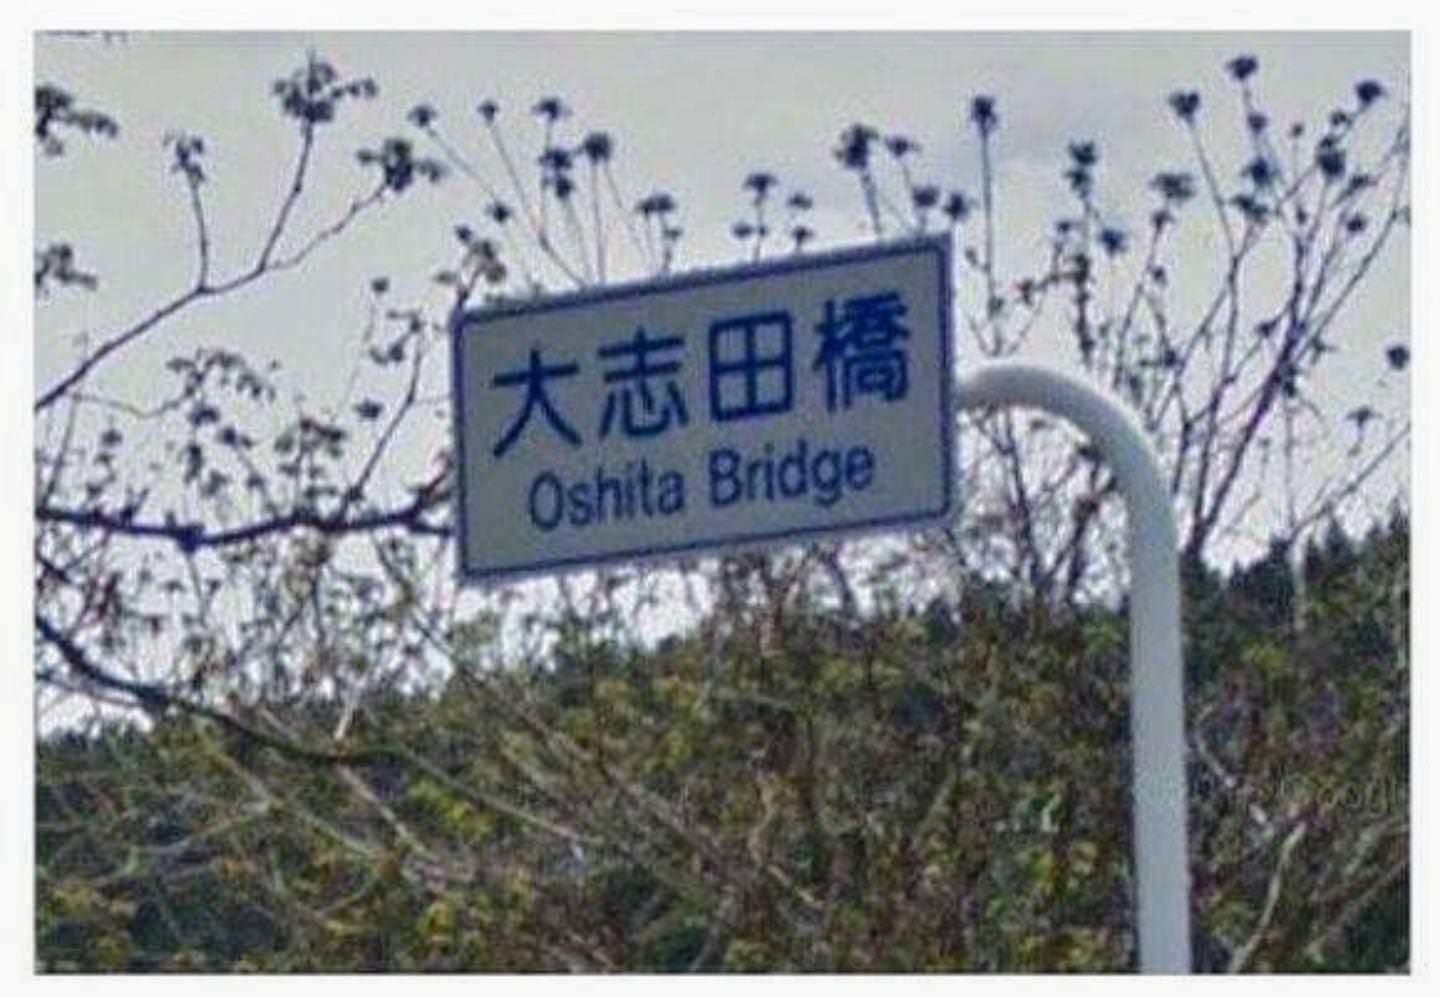 When you didn't think you were gonna see a bridge but then you see a bridge